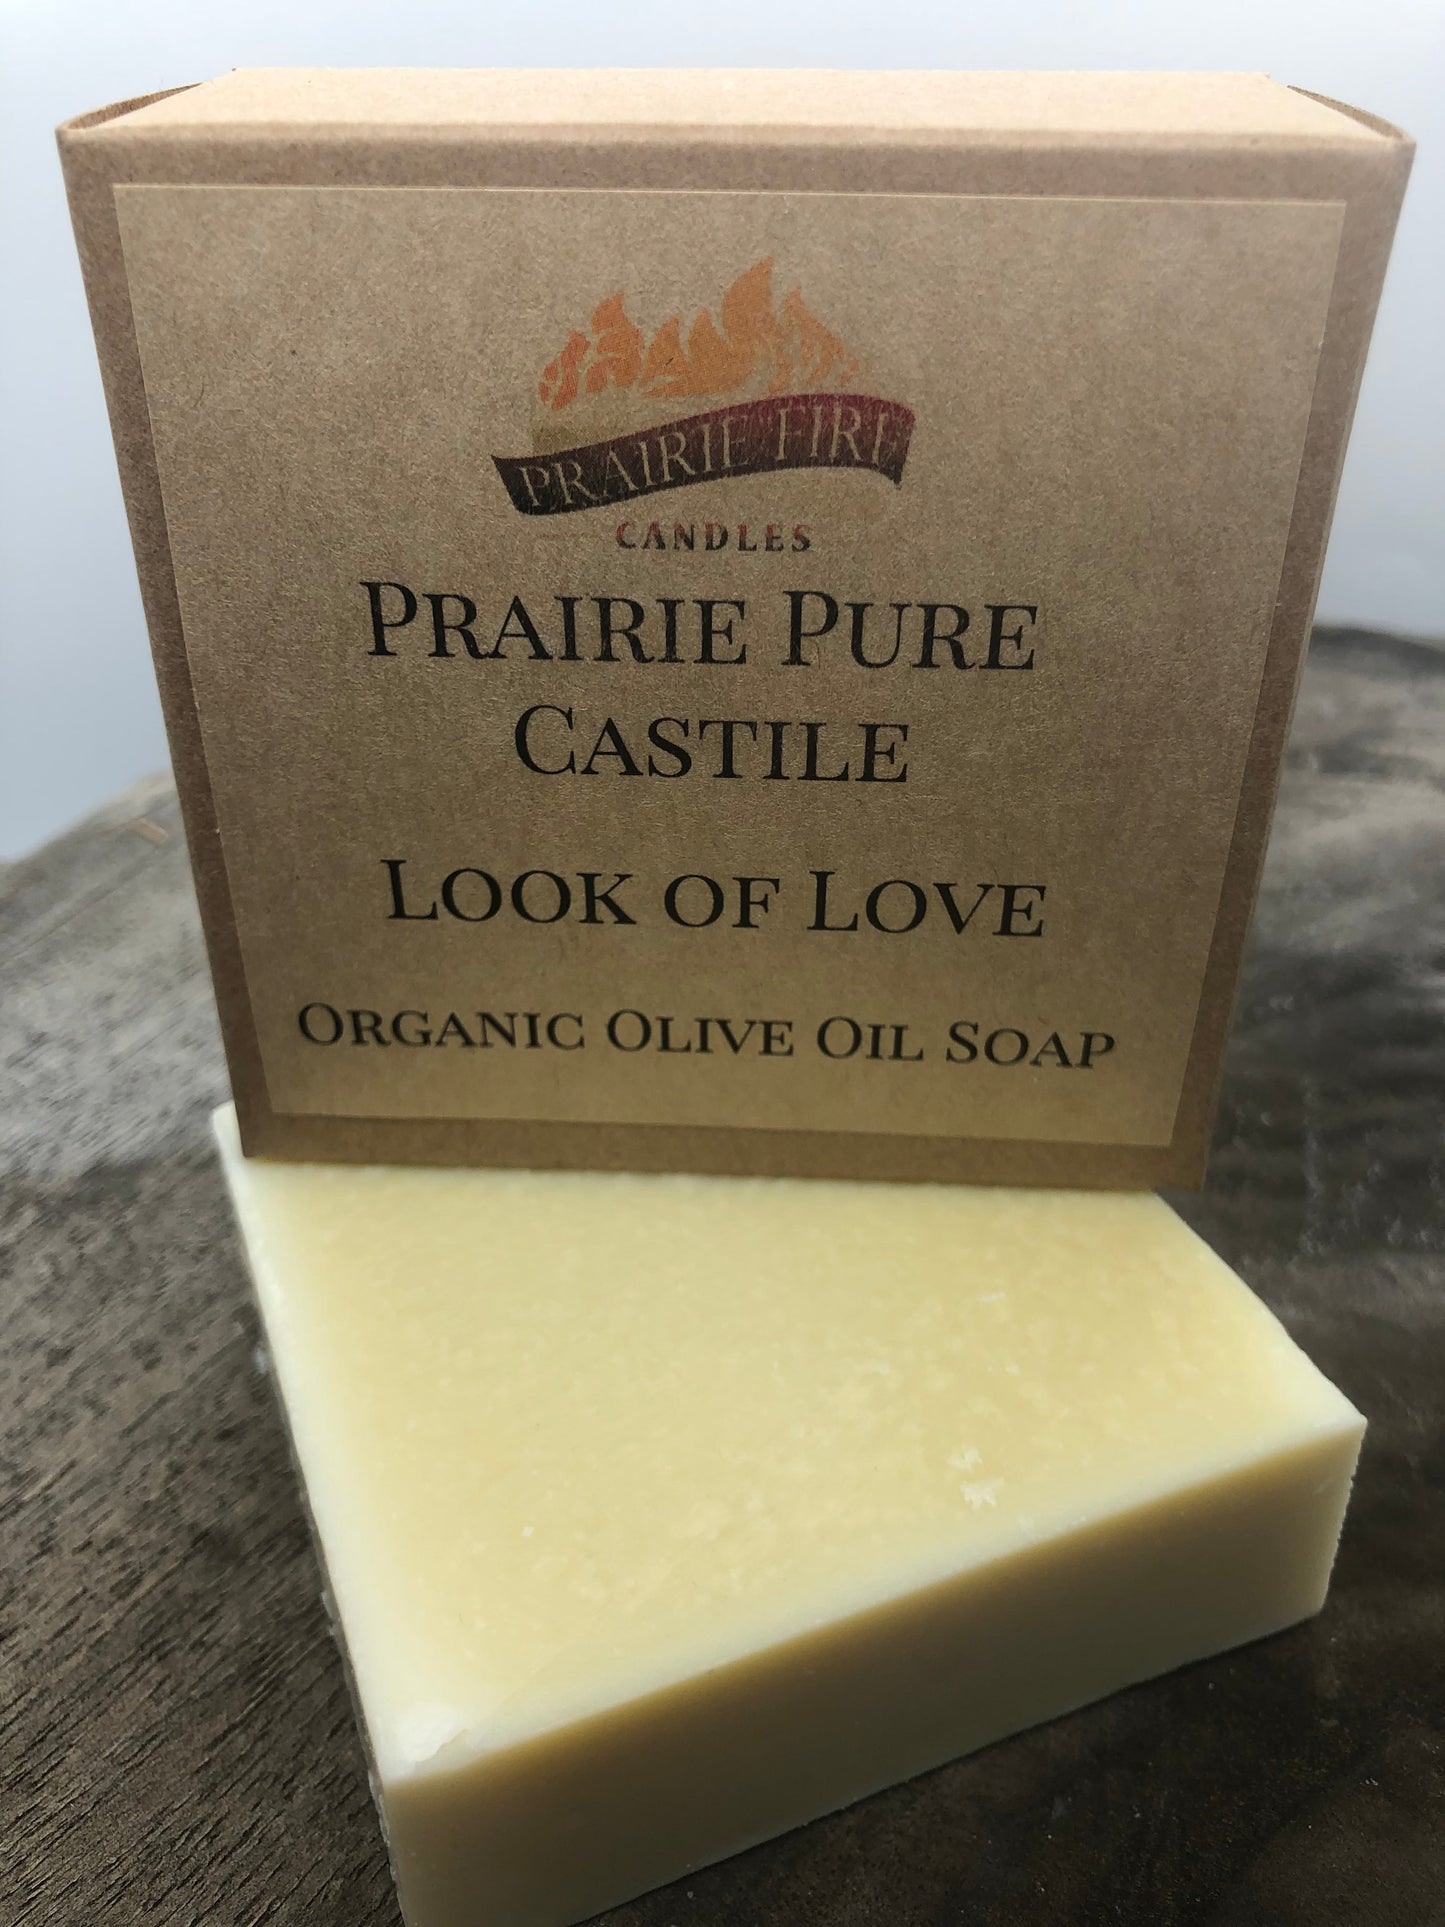 look of love real castile organic olive oil soap for sensitive skin - dye free - 100% certified organic extra virgin olive oil by prairie fire tallow, candles, and lavender